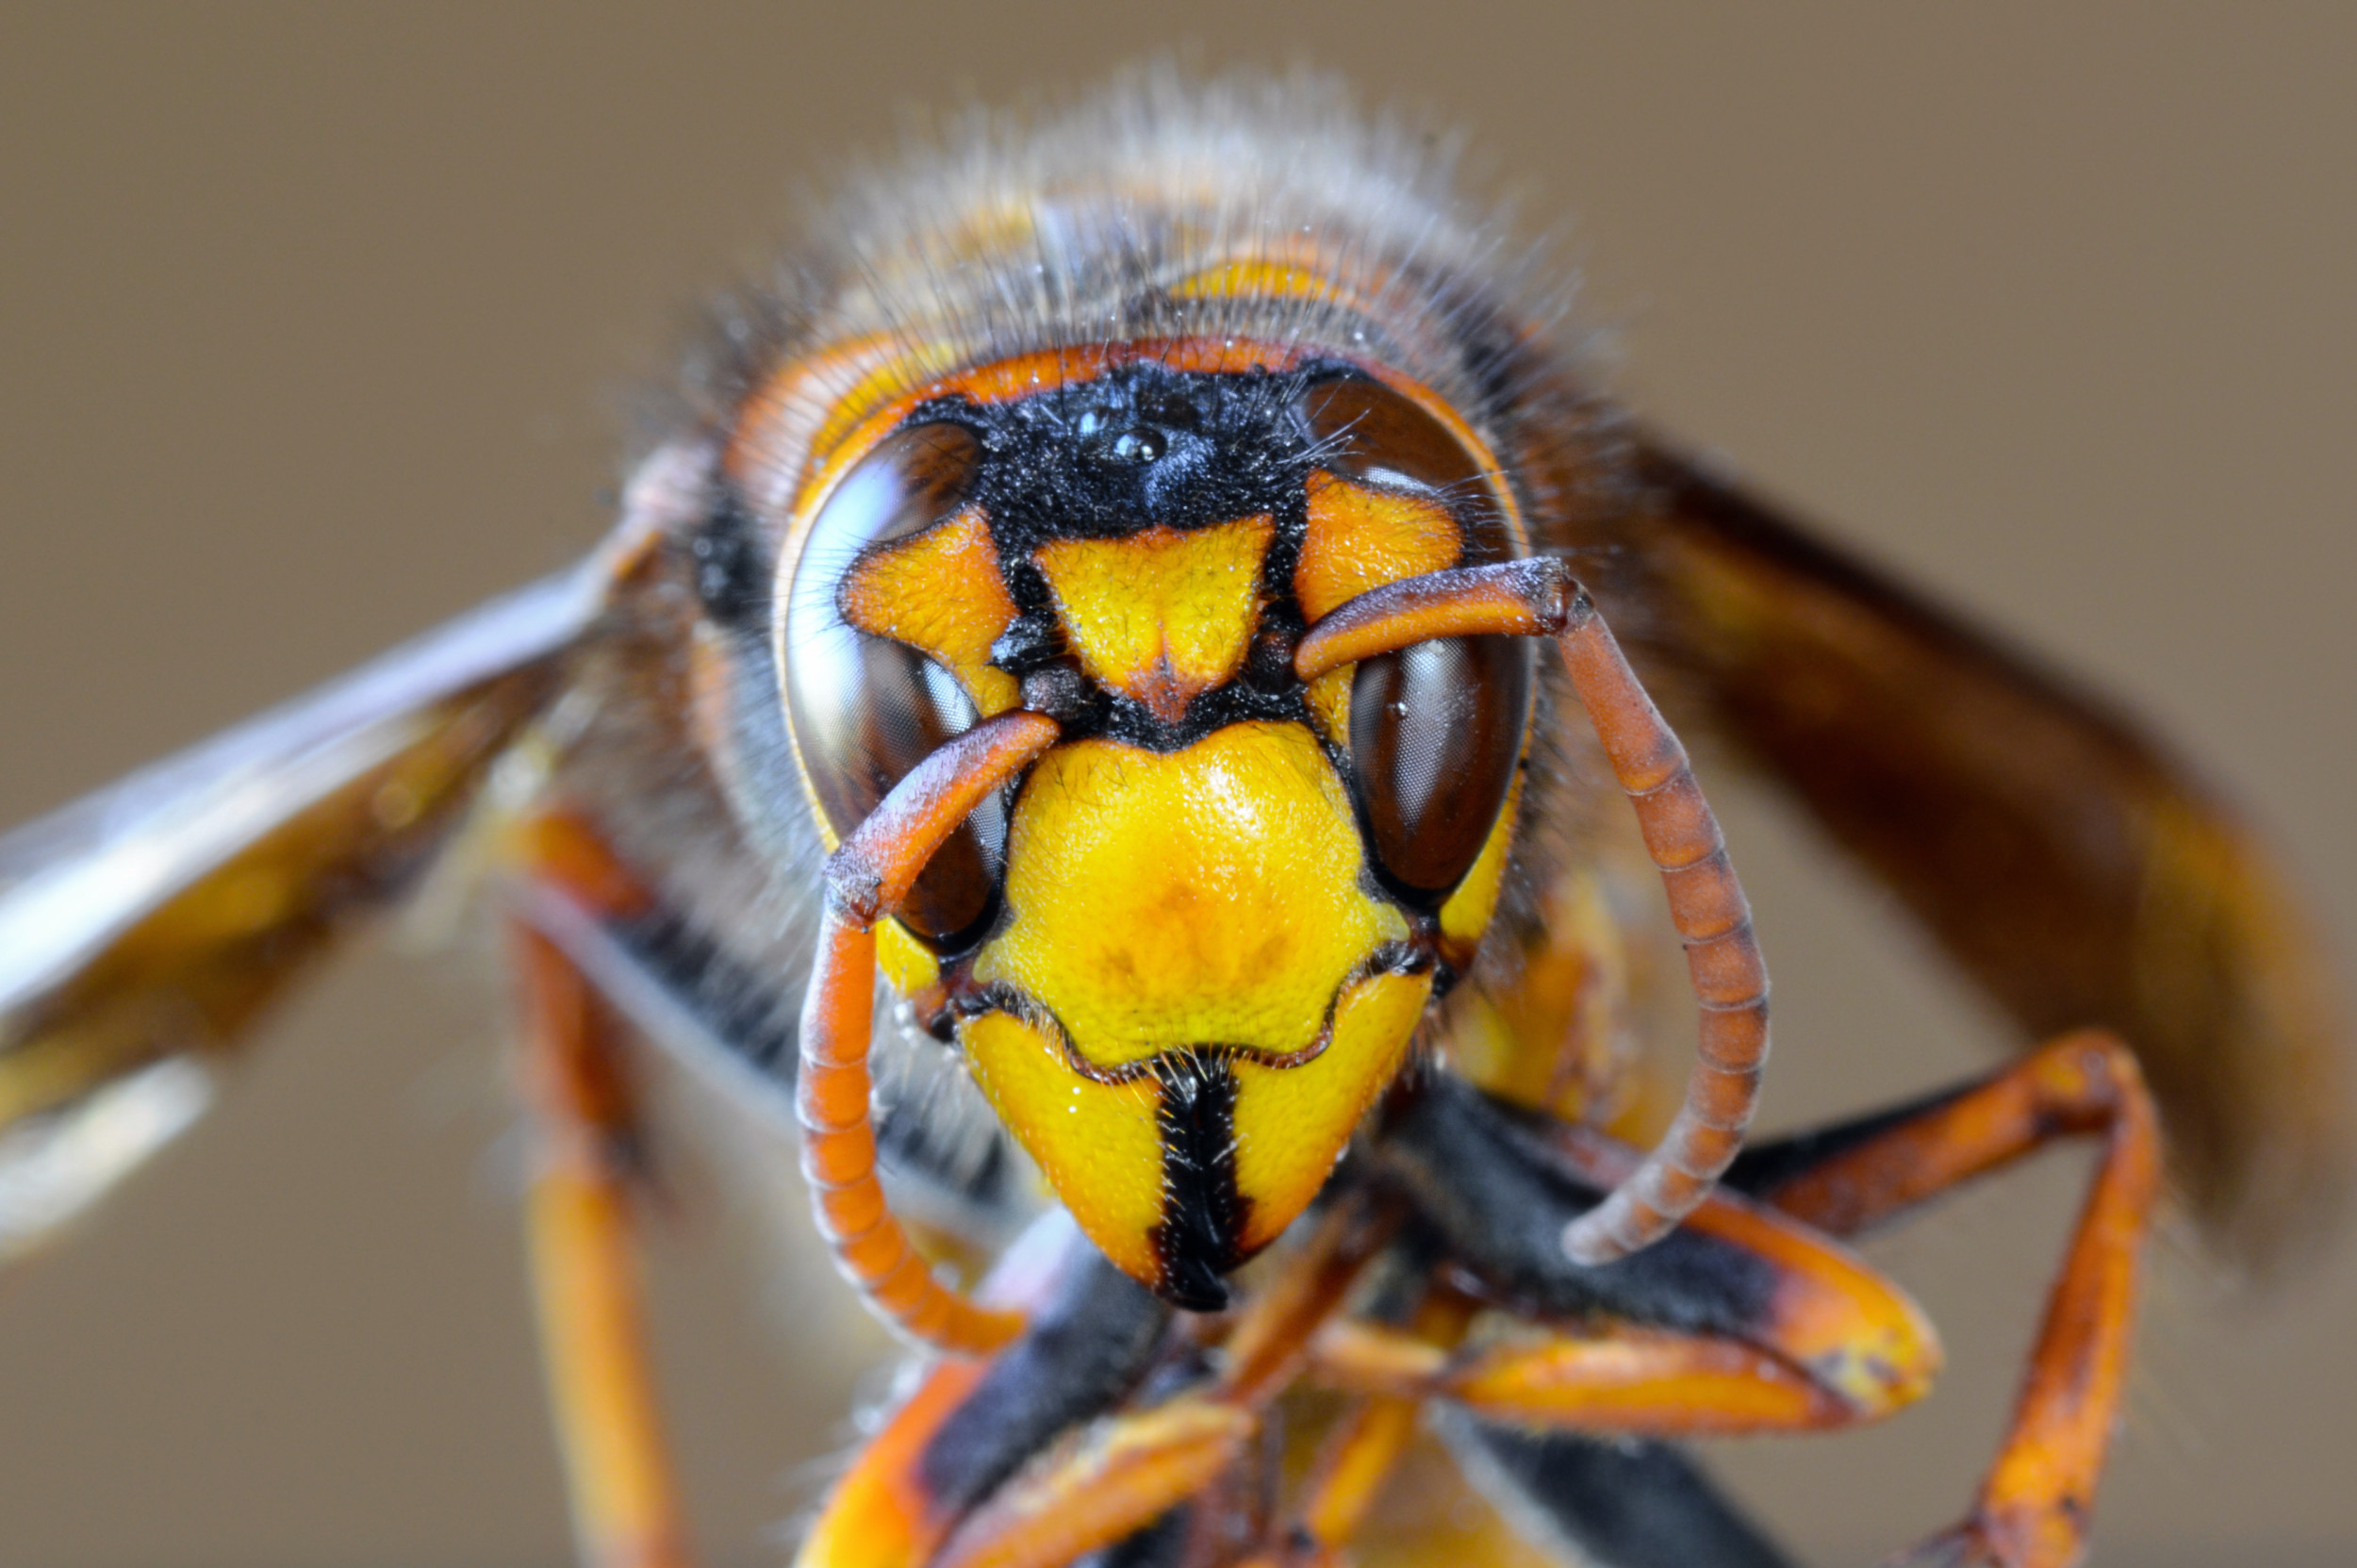 Giant wasps are emerging across Pennsylvania, but they're native